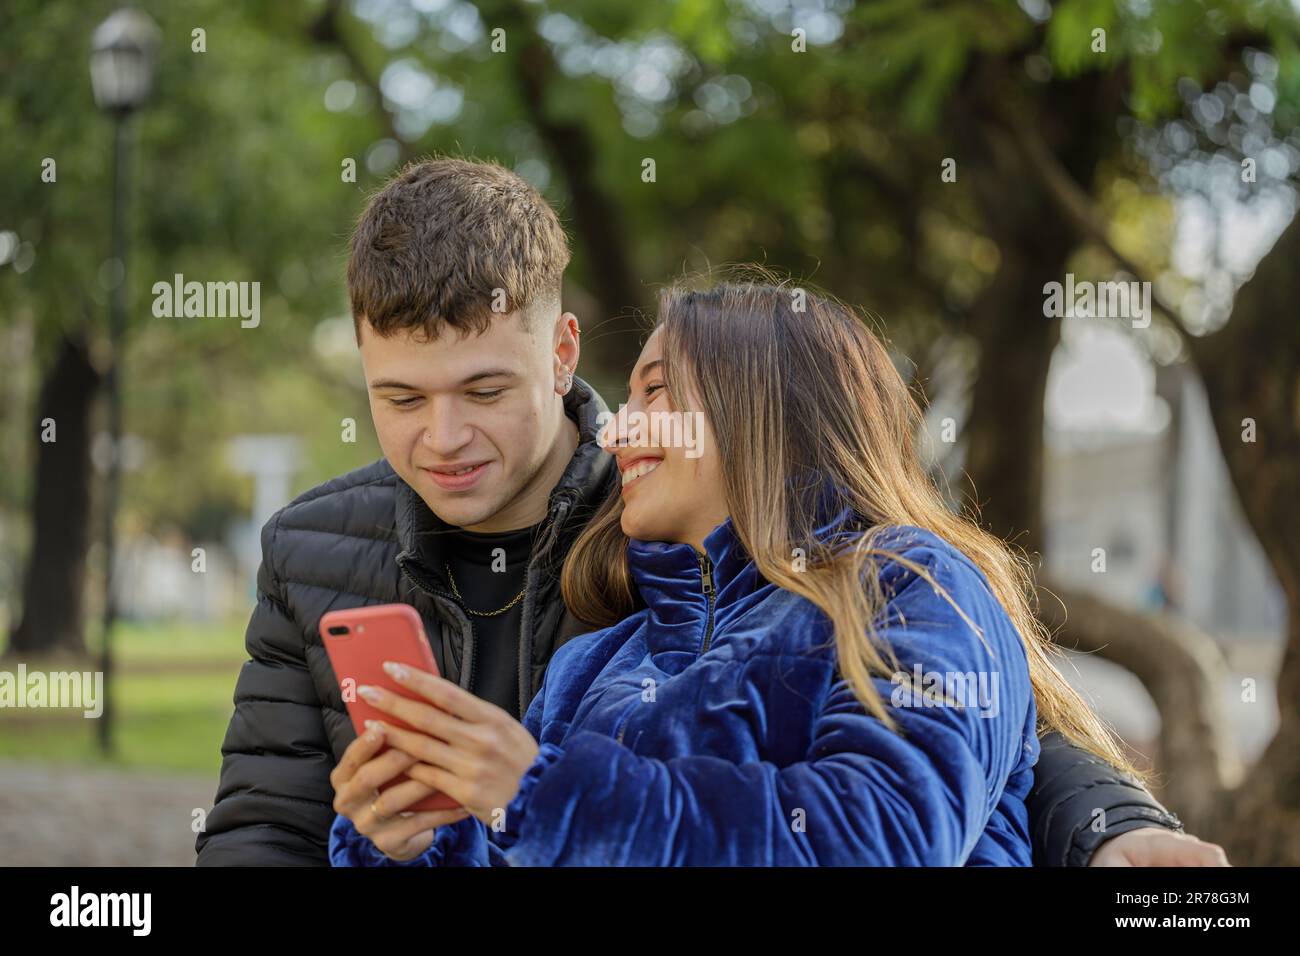 Young couple sitting on a bench in a public park. Stock Photo